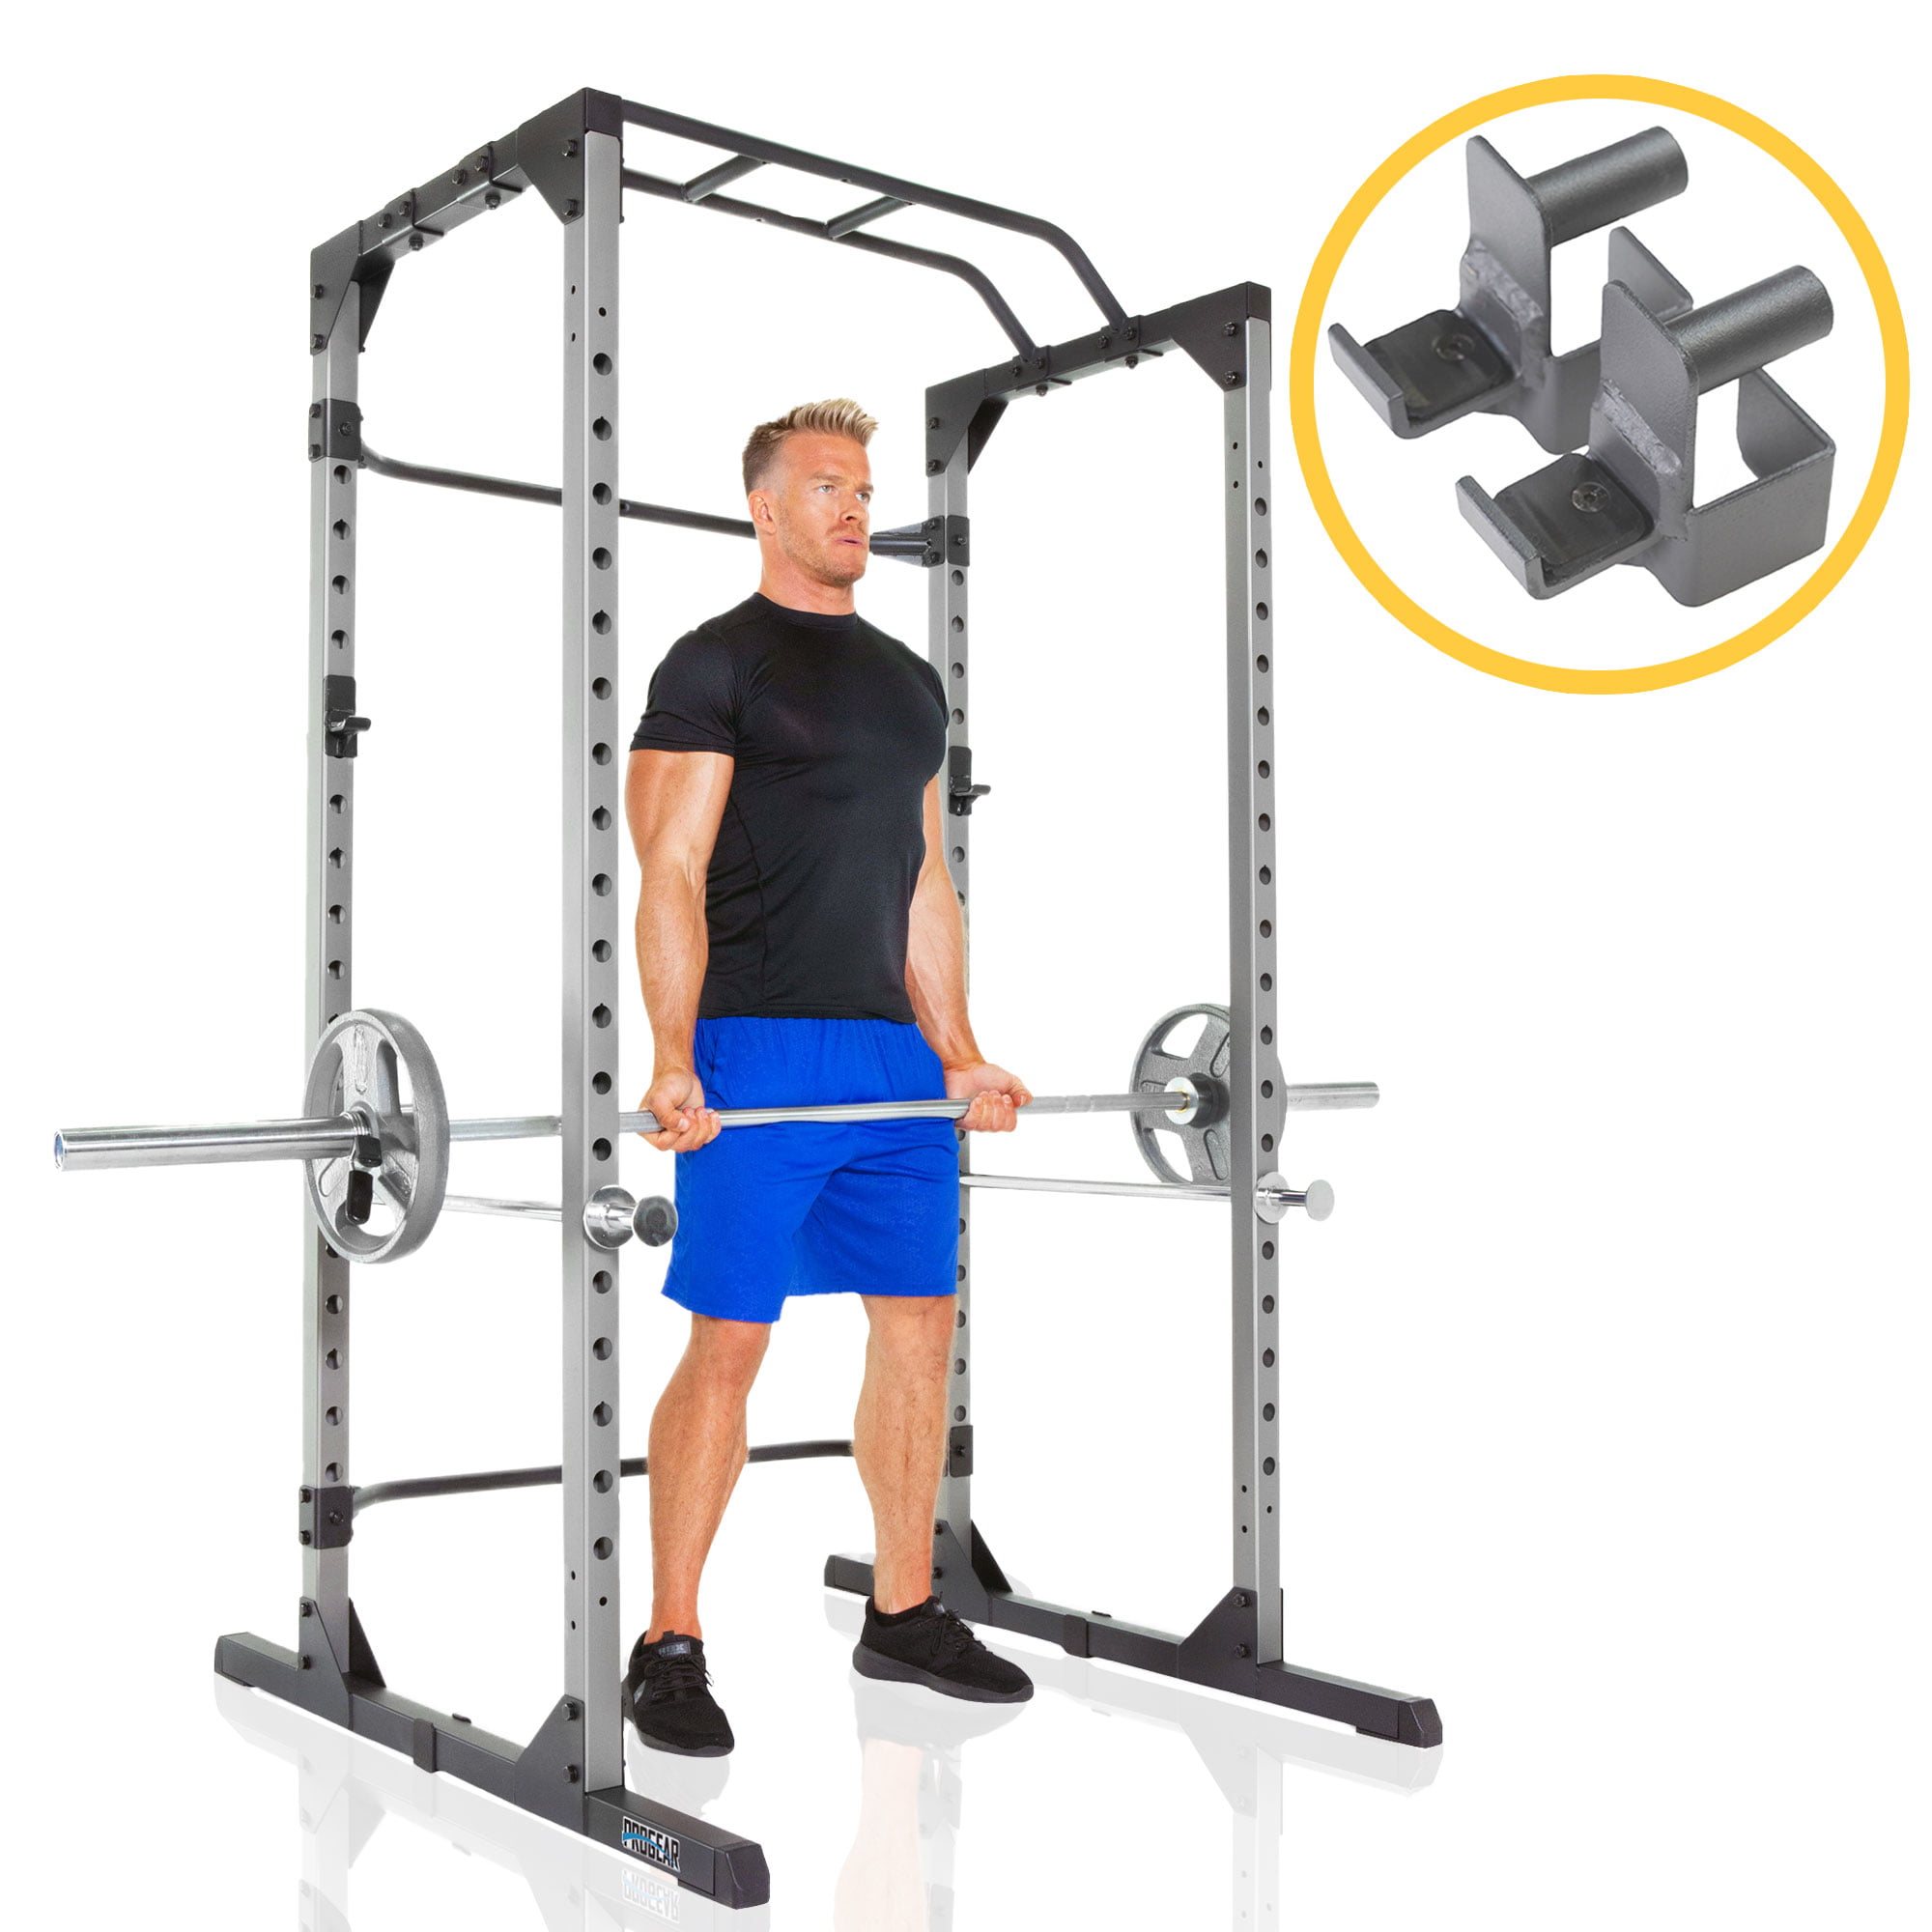 ProGear Squat Rack Power Cage w/ J-Hooks (800-Lbs Capacity) $209 / Lat Pull down and Cable Row $199 / Wal-Mart - Free shipping